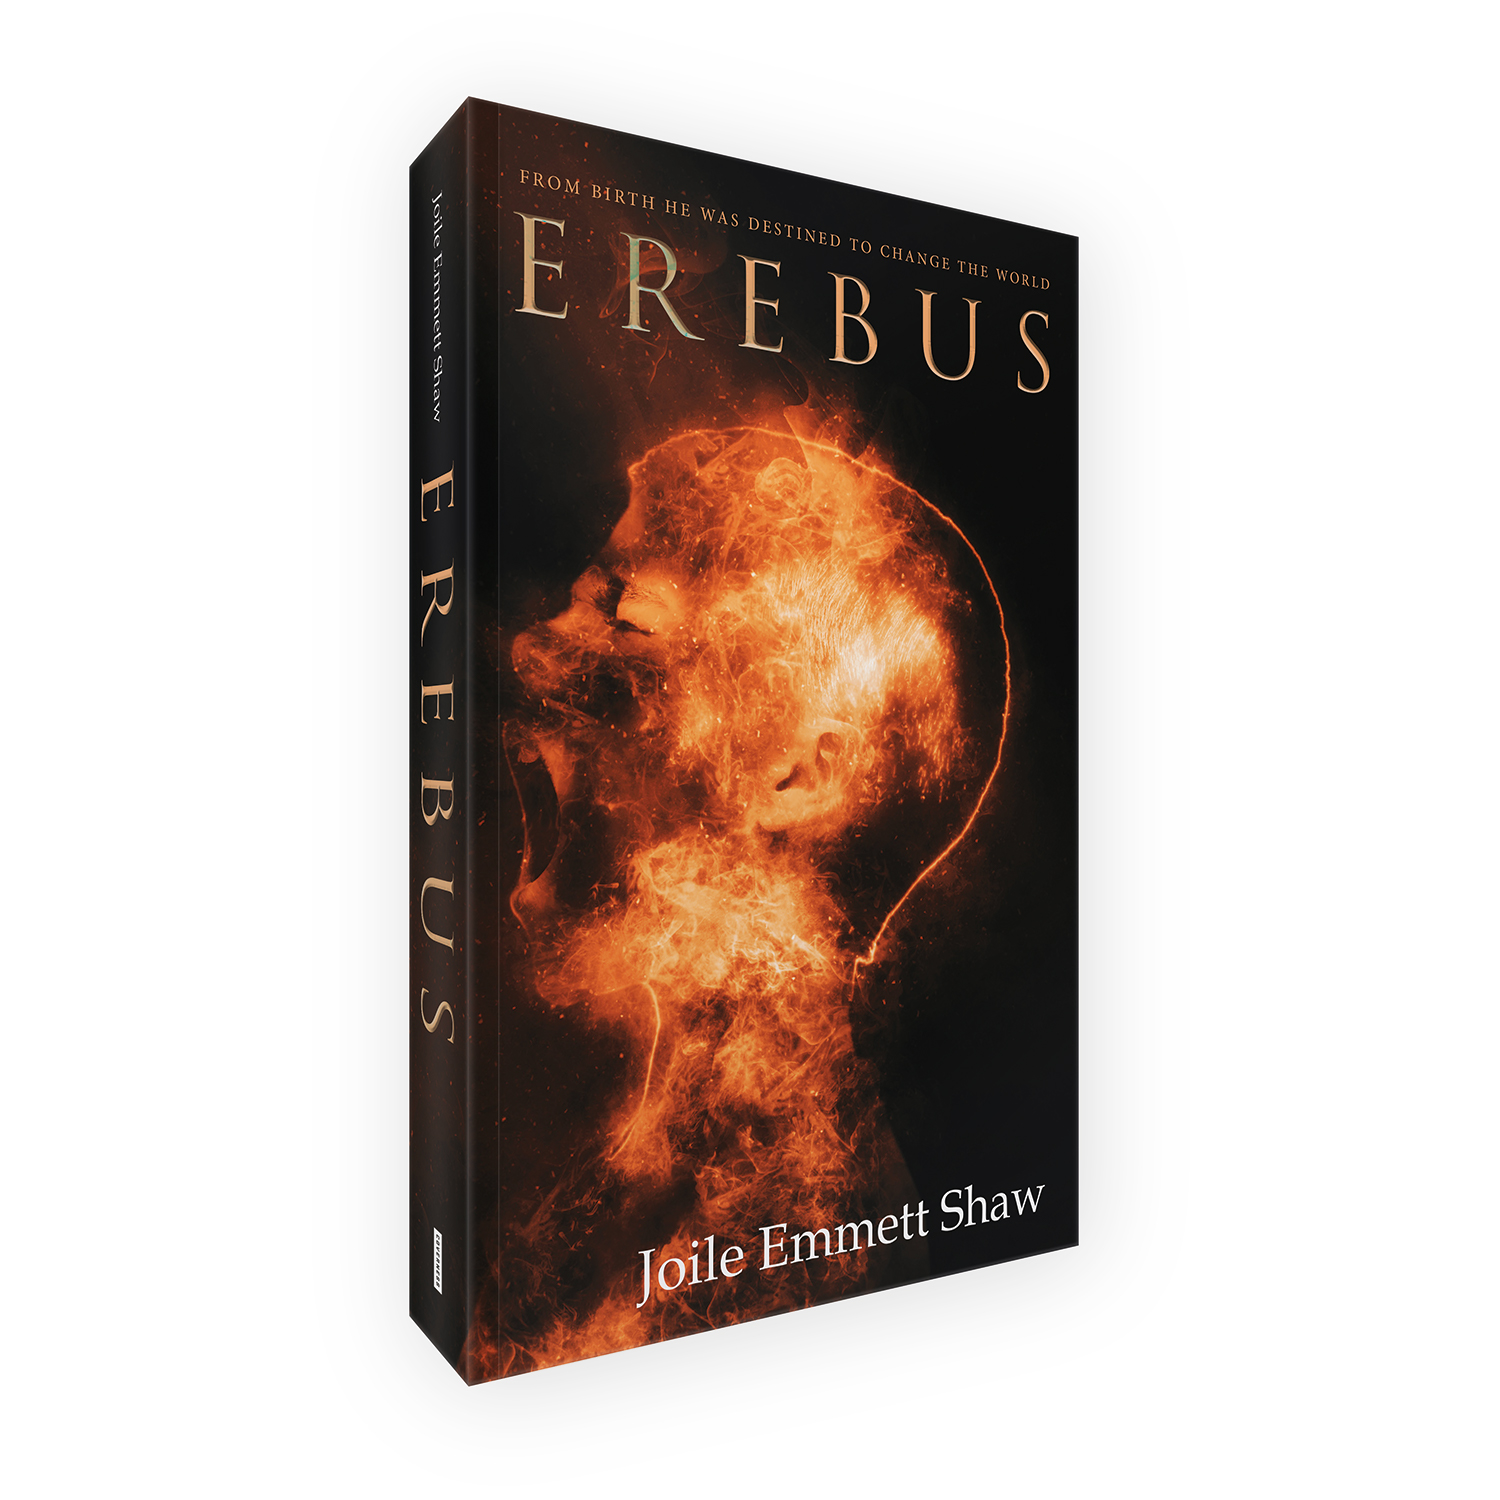 'Erebus' is a bespoke cover design for a modern horror novel. The book cover was designed by Mark Thomas, of coverness.com. To find out more about my book design services, please visit www.coverness.com.